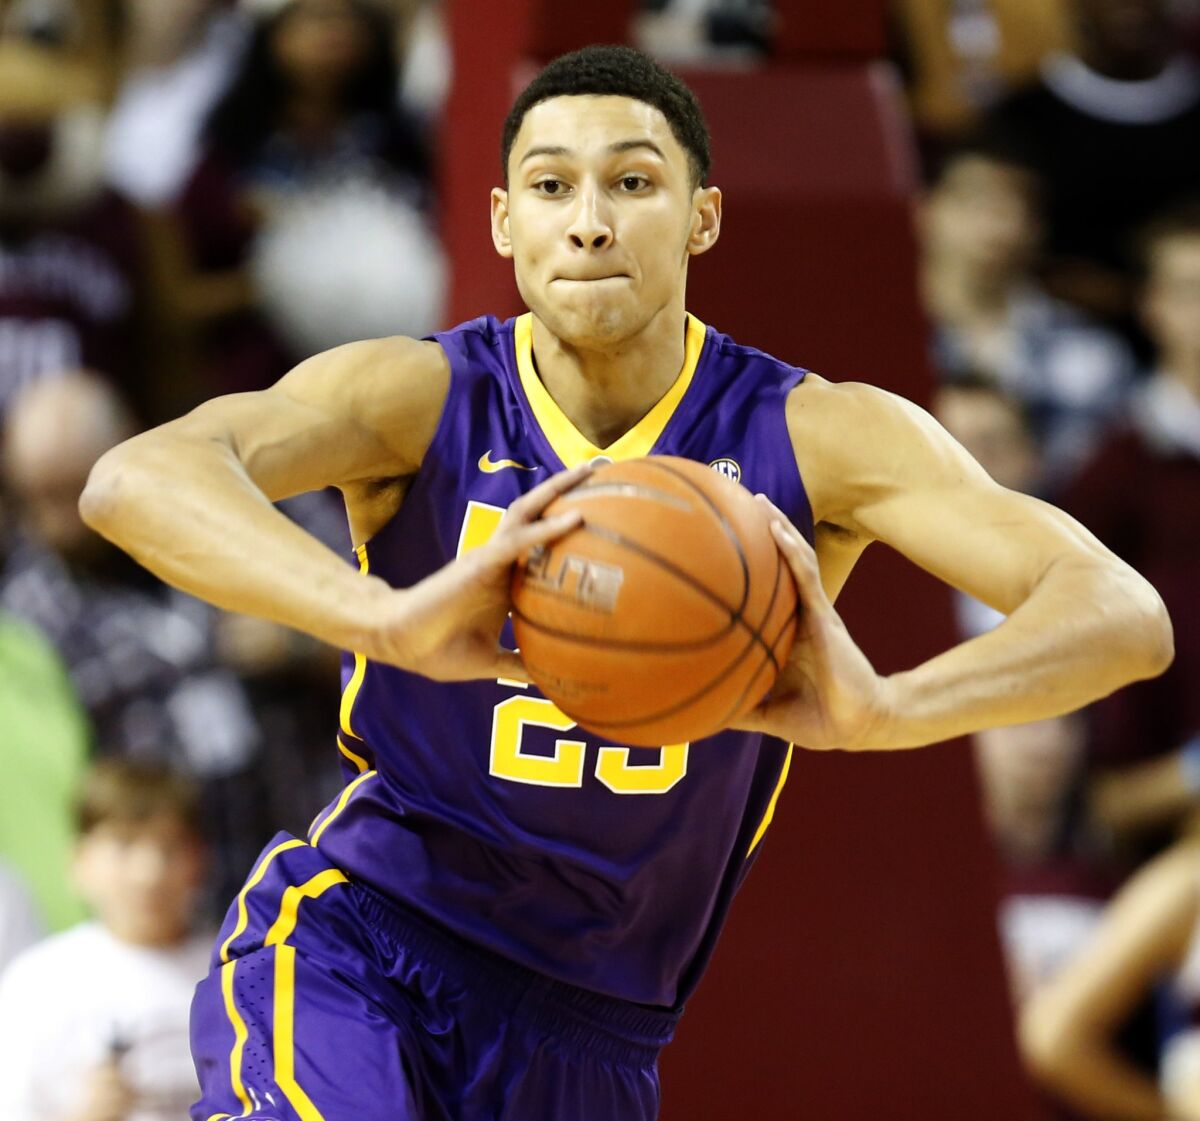 Louisiana State forward Ben Simmons is surely on the Lakers' radar. He could be the No. 1 pick in the 2016 draft.